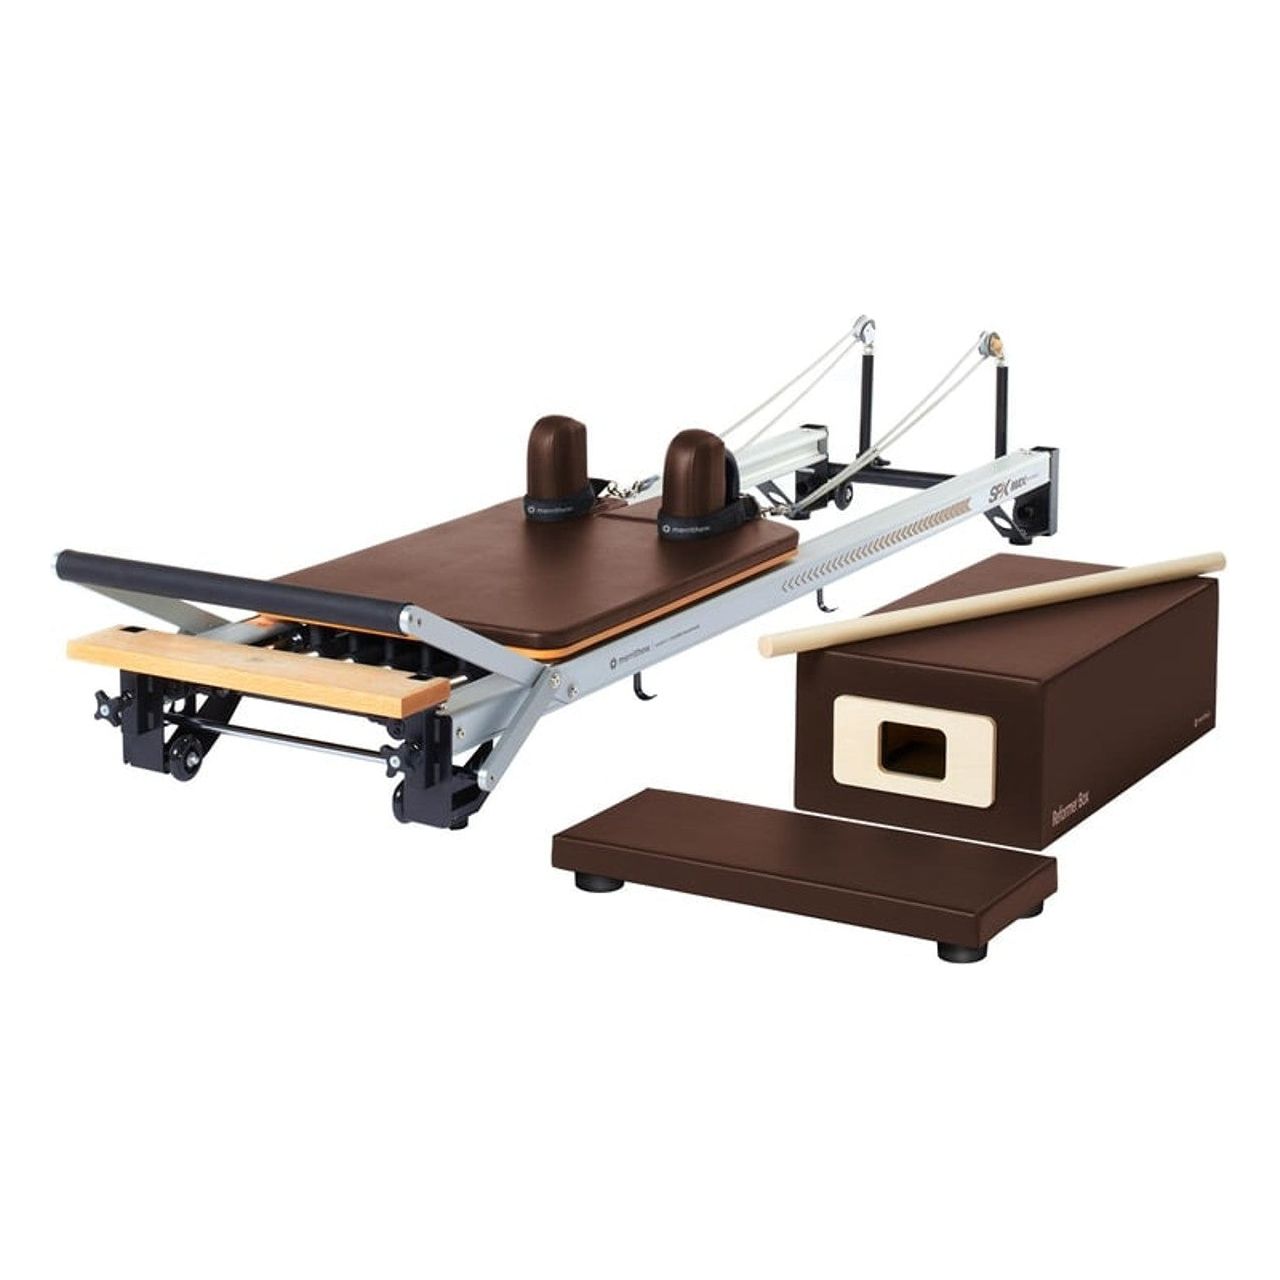 A picture of the MERRITHEW PILATES V2 MAX REFORMER in the warm and inviting Sierra Brick color, featuring a rich, deep brick red that creates a welcoming ambiance.